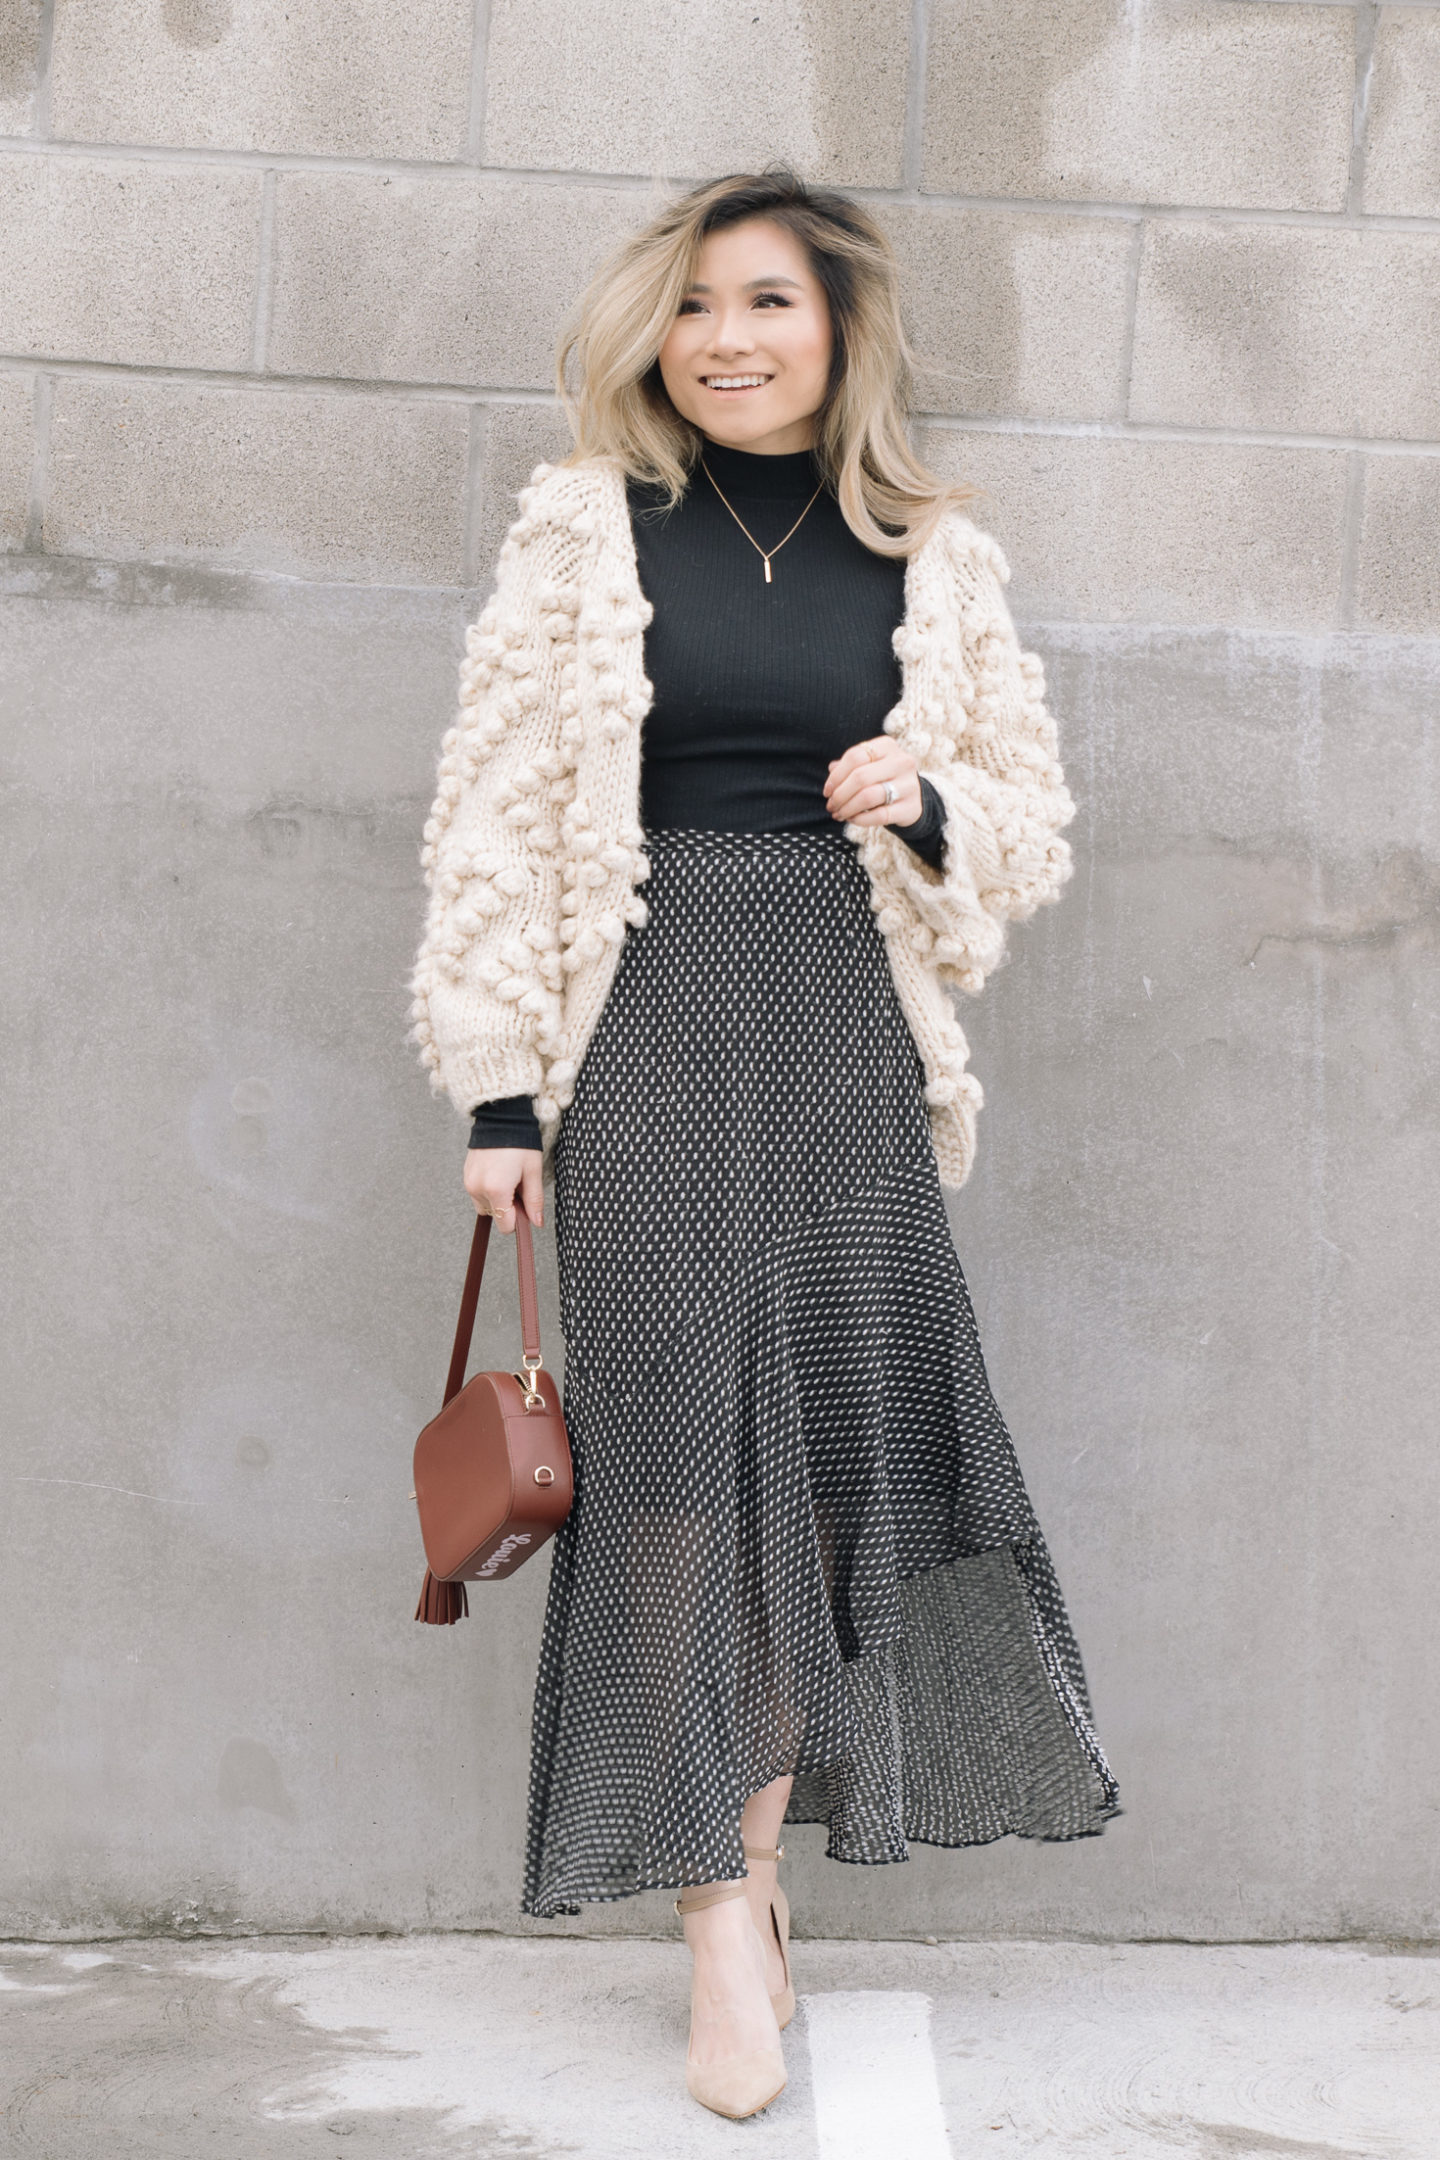 WINTER to SPRING Transitional Lookbook - Miss Louie